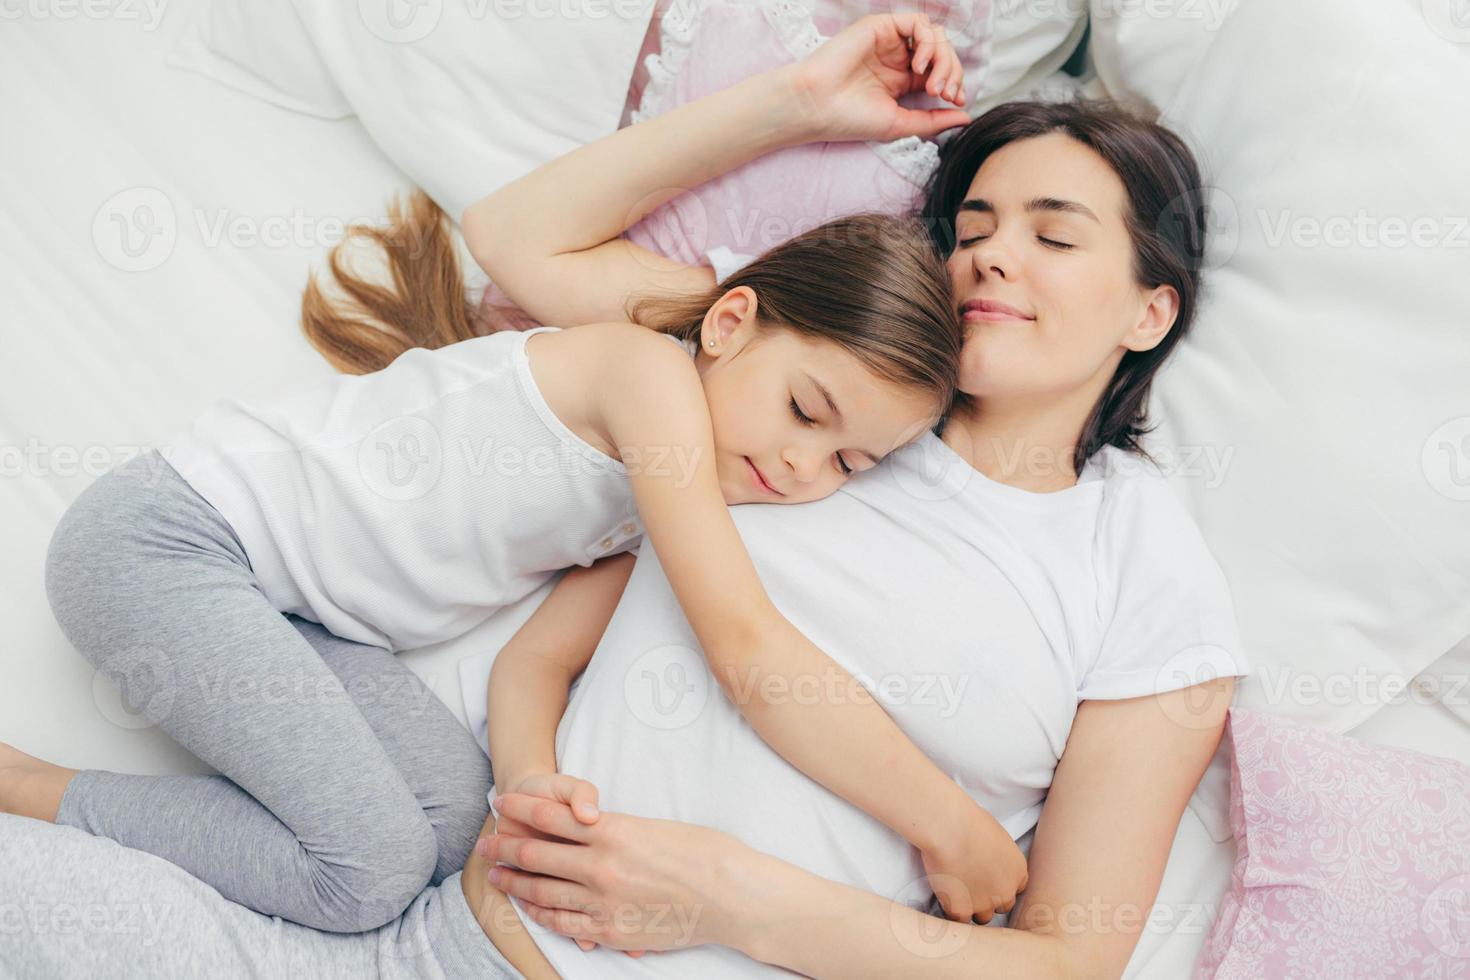 Pleased little child sleeps near her mother, embraces with love, has pleasant dreams, lie on comfortable bed. Mum and cute daughter have good sleep in bedroom. Family, sleeping and rest concept photo